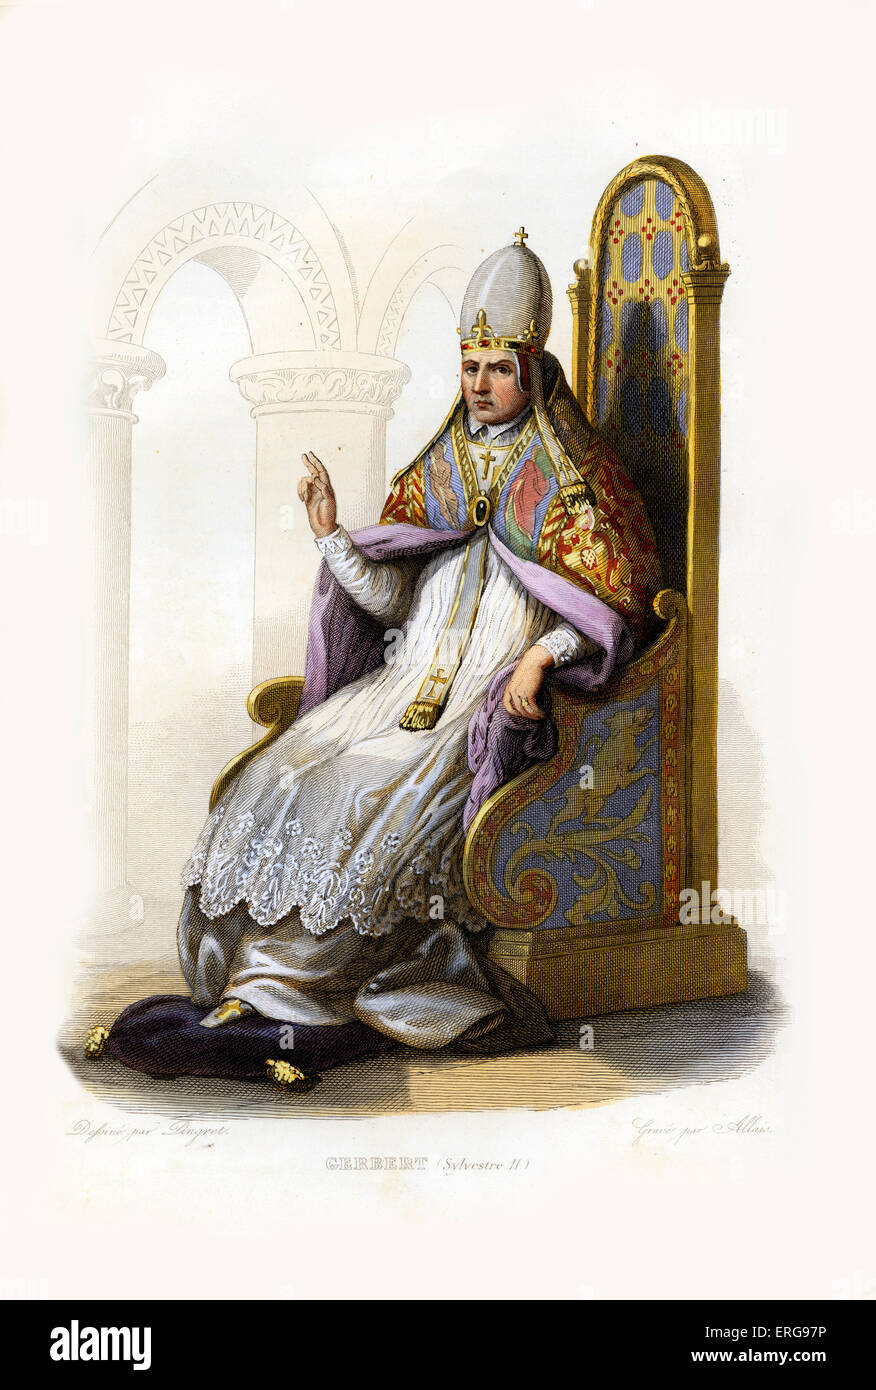 Pope Sylvester II (or Silvester II), born Gerbert d'Aurillac. Prolific  scholar, teacher, and Pope. c. 940-1003. Engraving by Stock Photo - Alamy